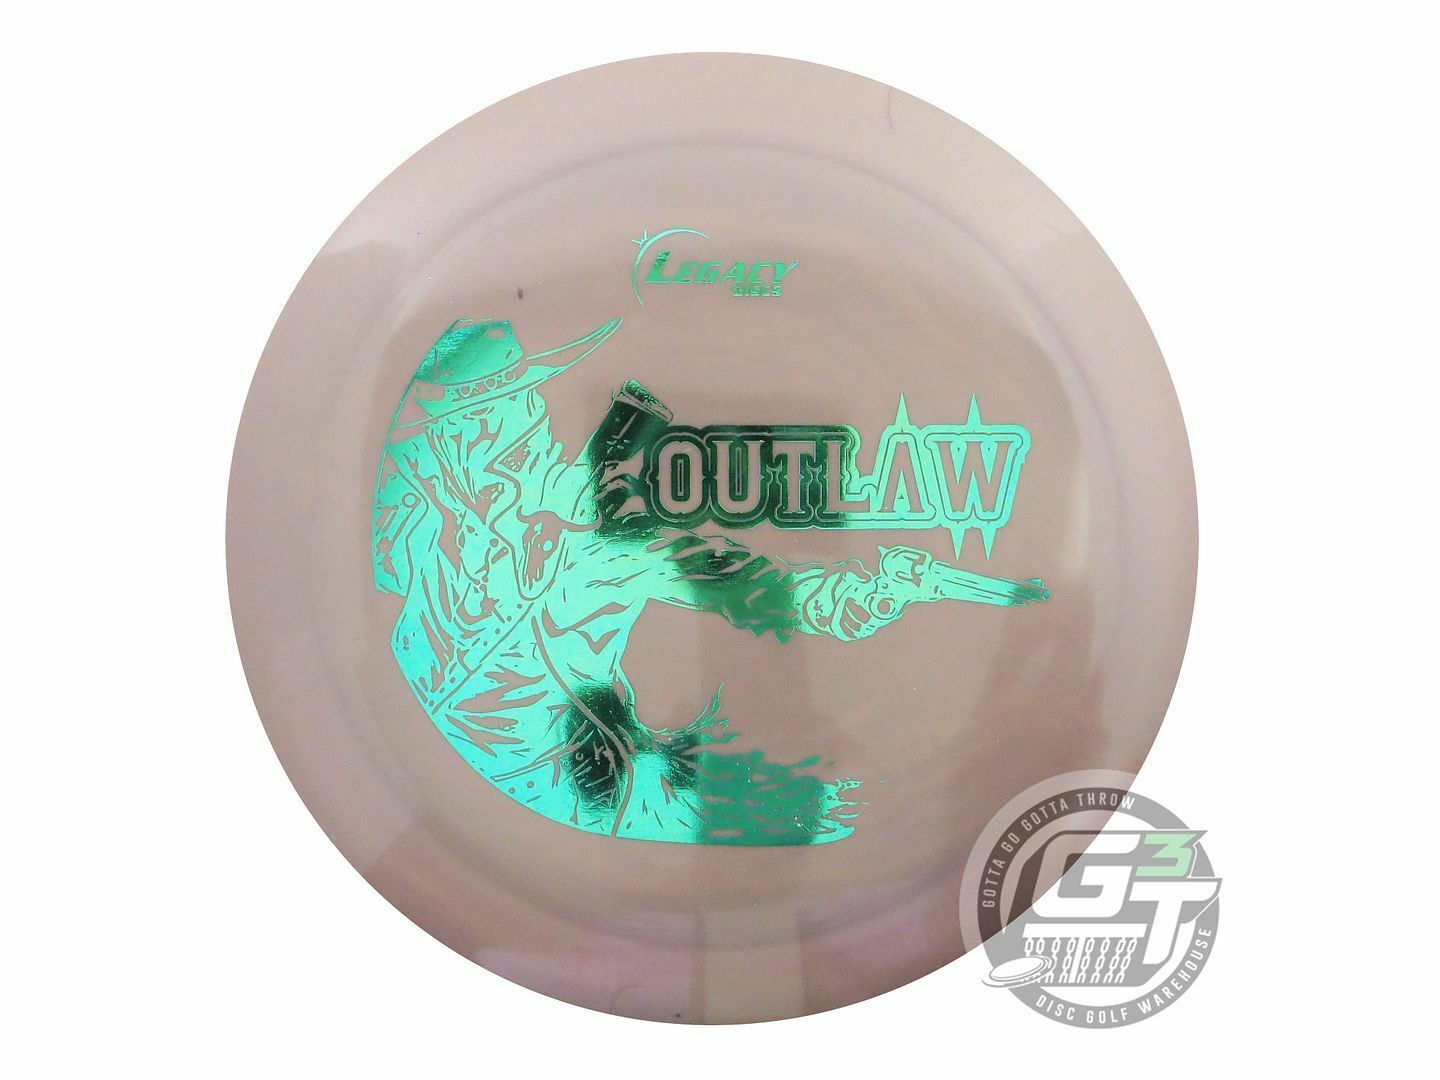 Legacy Legend Outlaw Distance Driver Golf Disc (Individually Listed)